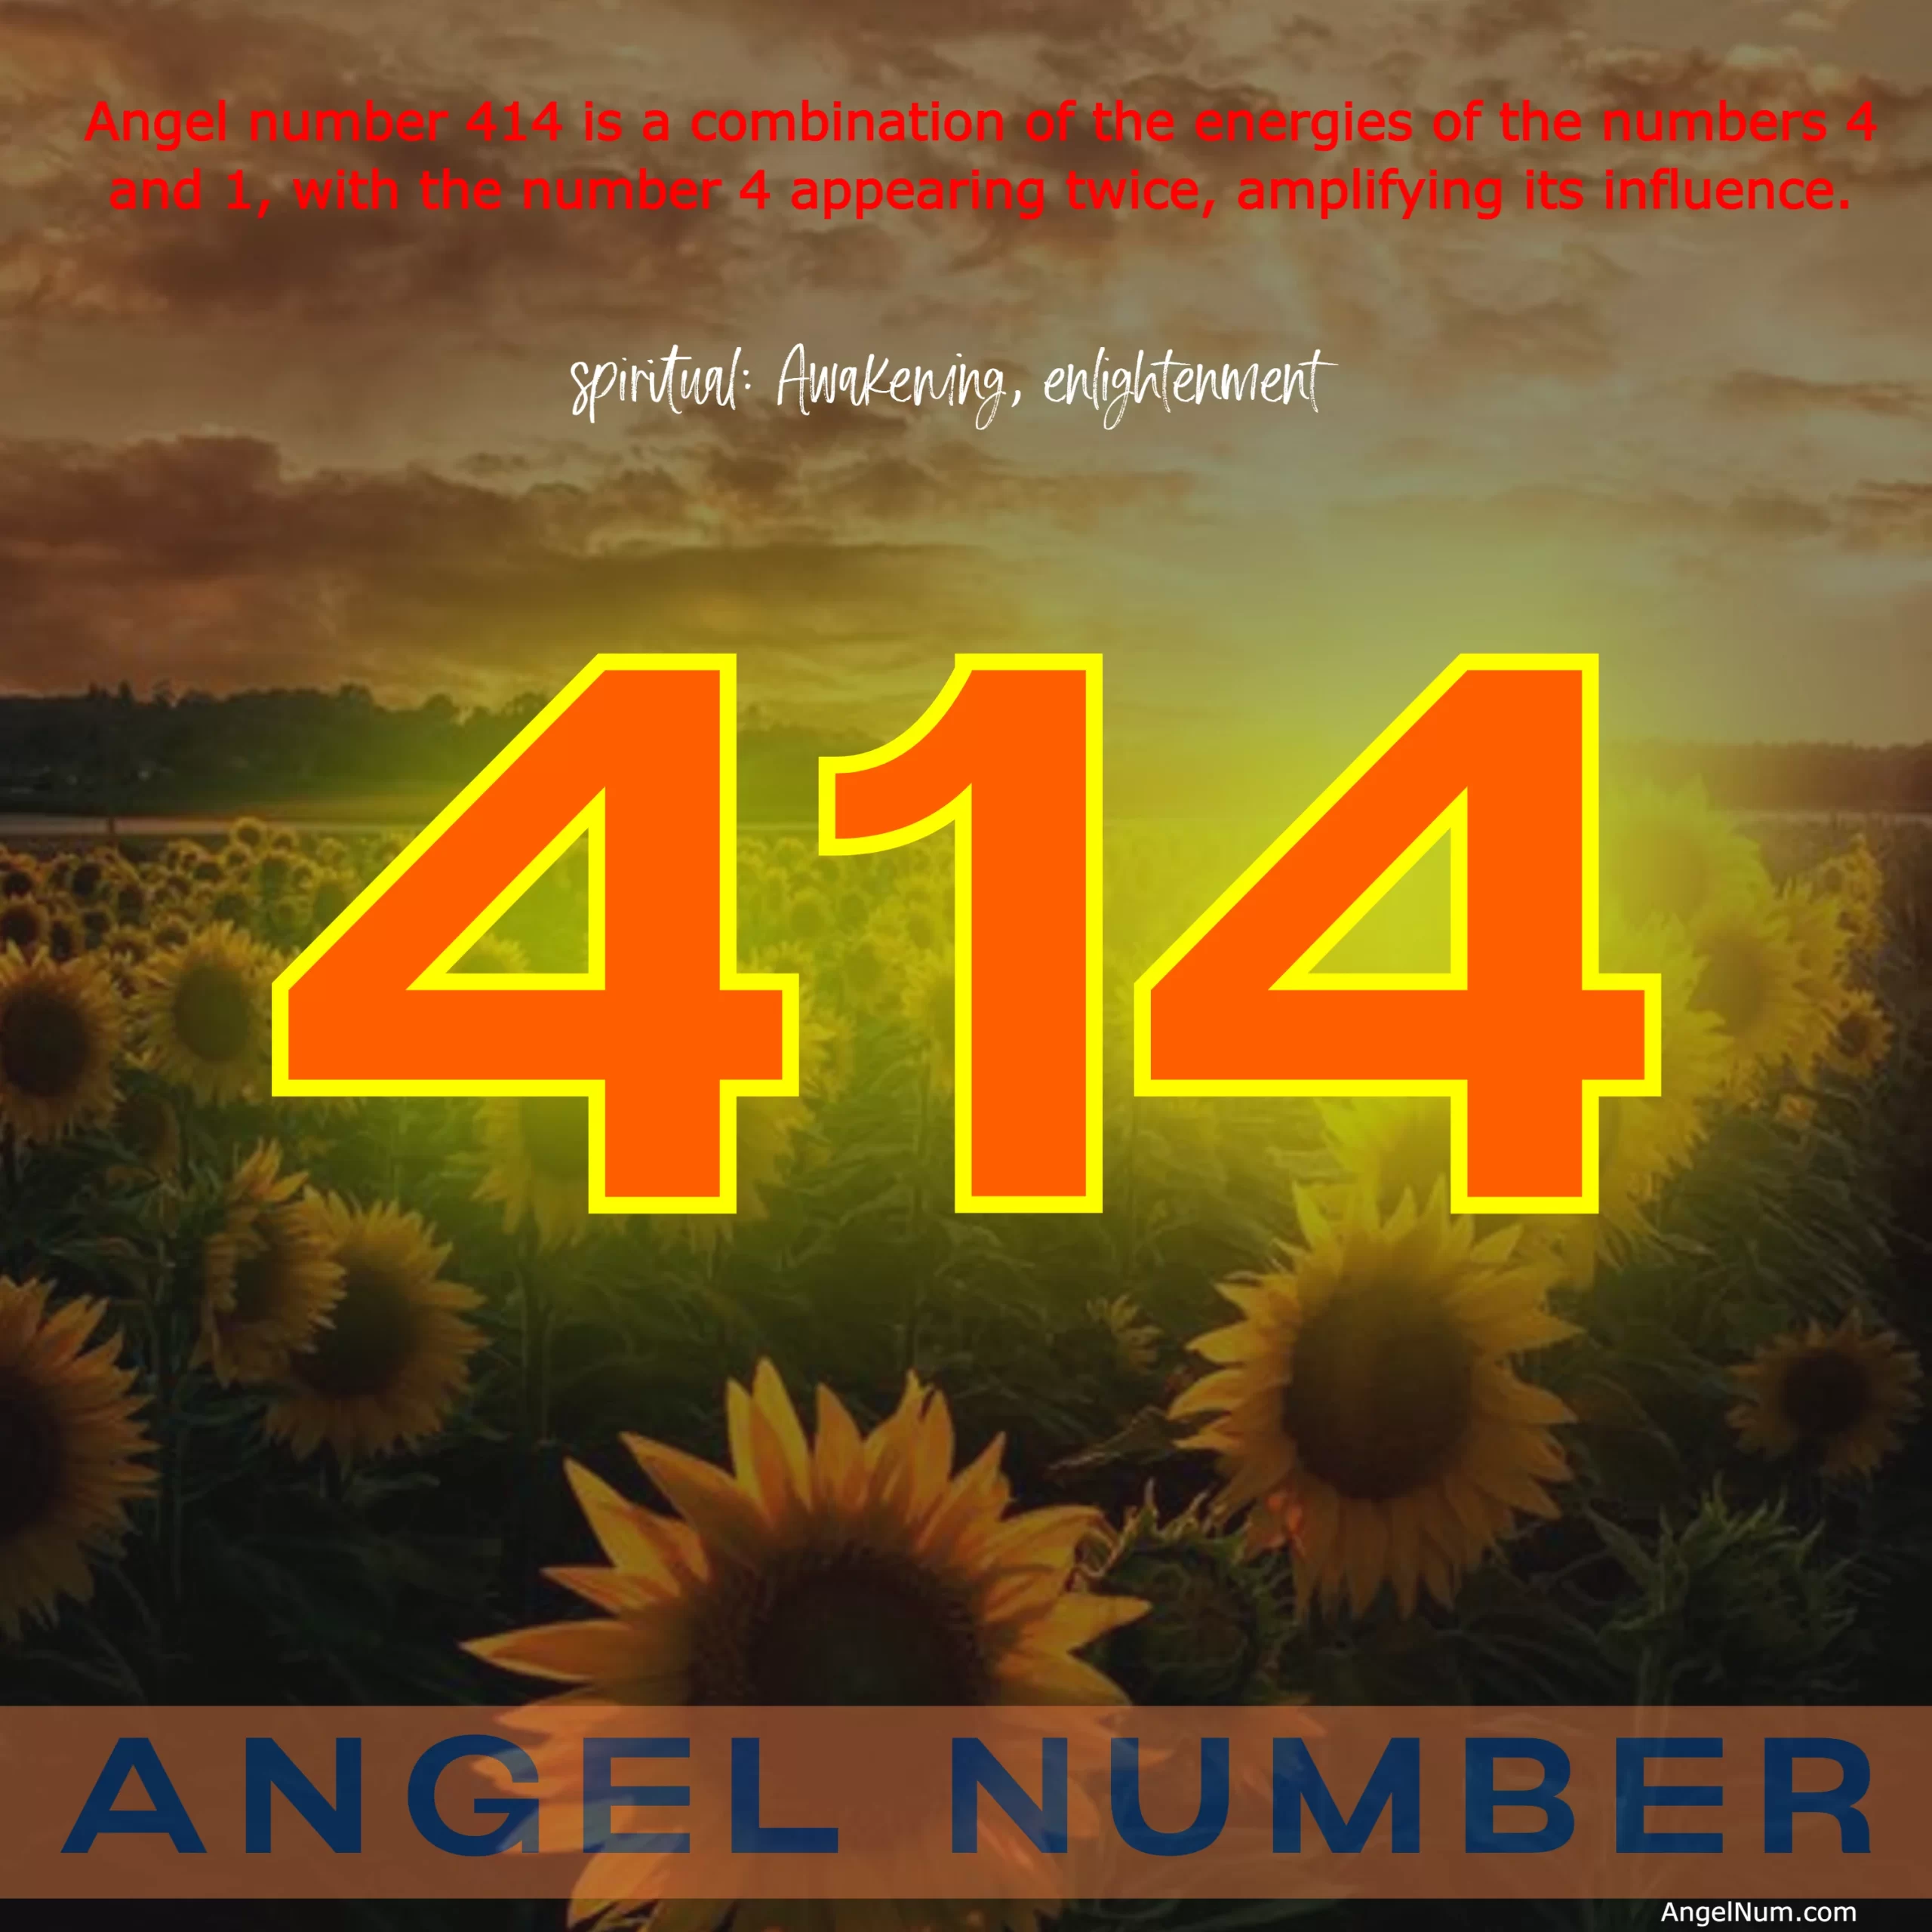 Discovering the Meaning and Significance of Angel Number 414